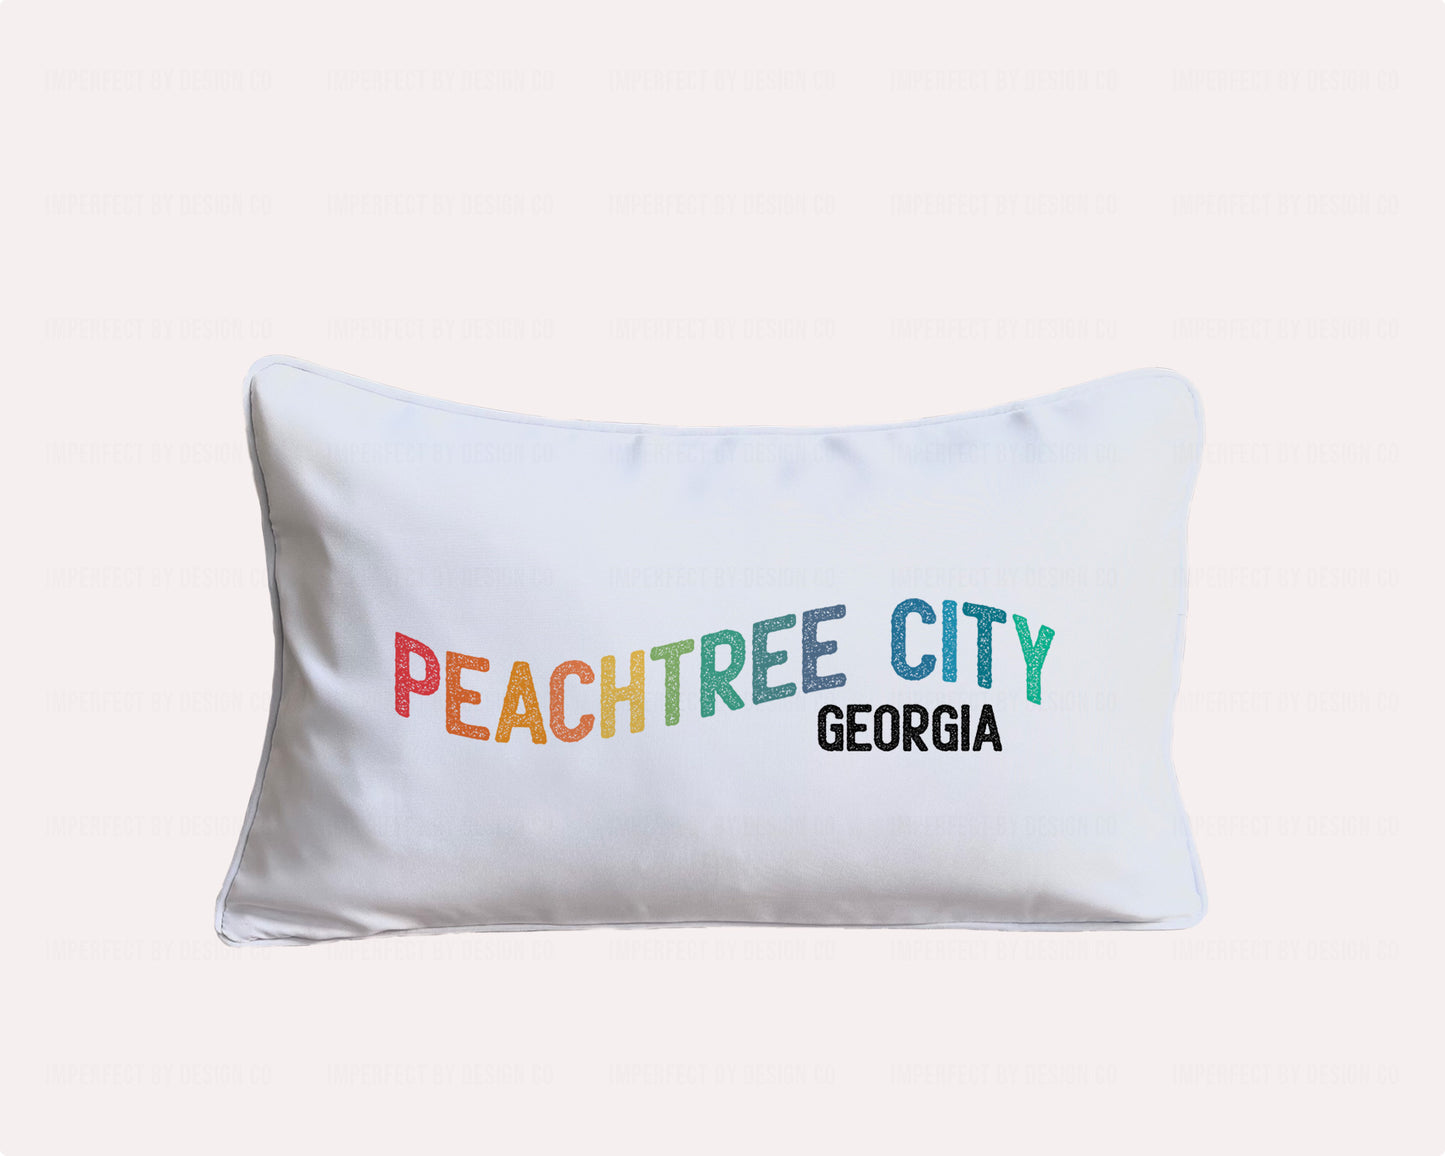 Bring some Southern charm to your outdoor living space with our Peachtree City indoor/outdoor pillow, featuring a vibrant multicolor "Peachtree City, Georgia" design in a playful waving font. The 12x20 inch size is perfect for adding a pop of color to your porch, patio, or pool deck. | imperfect by design co